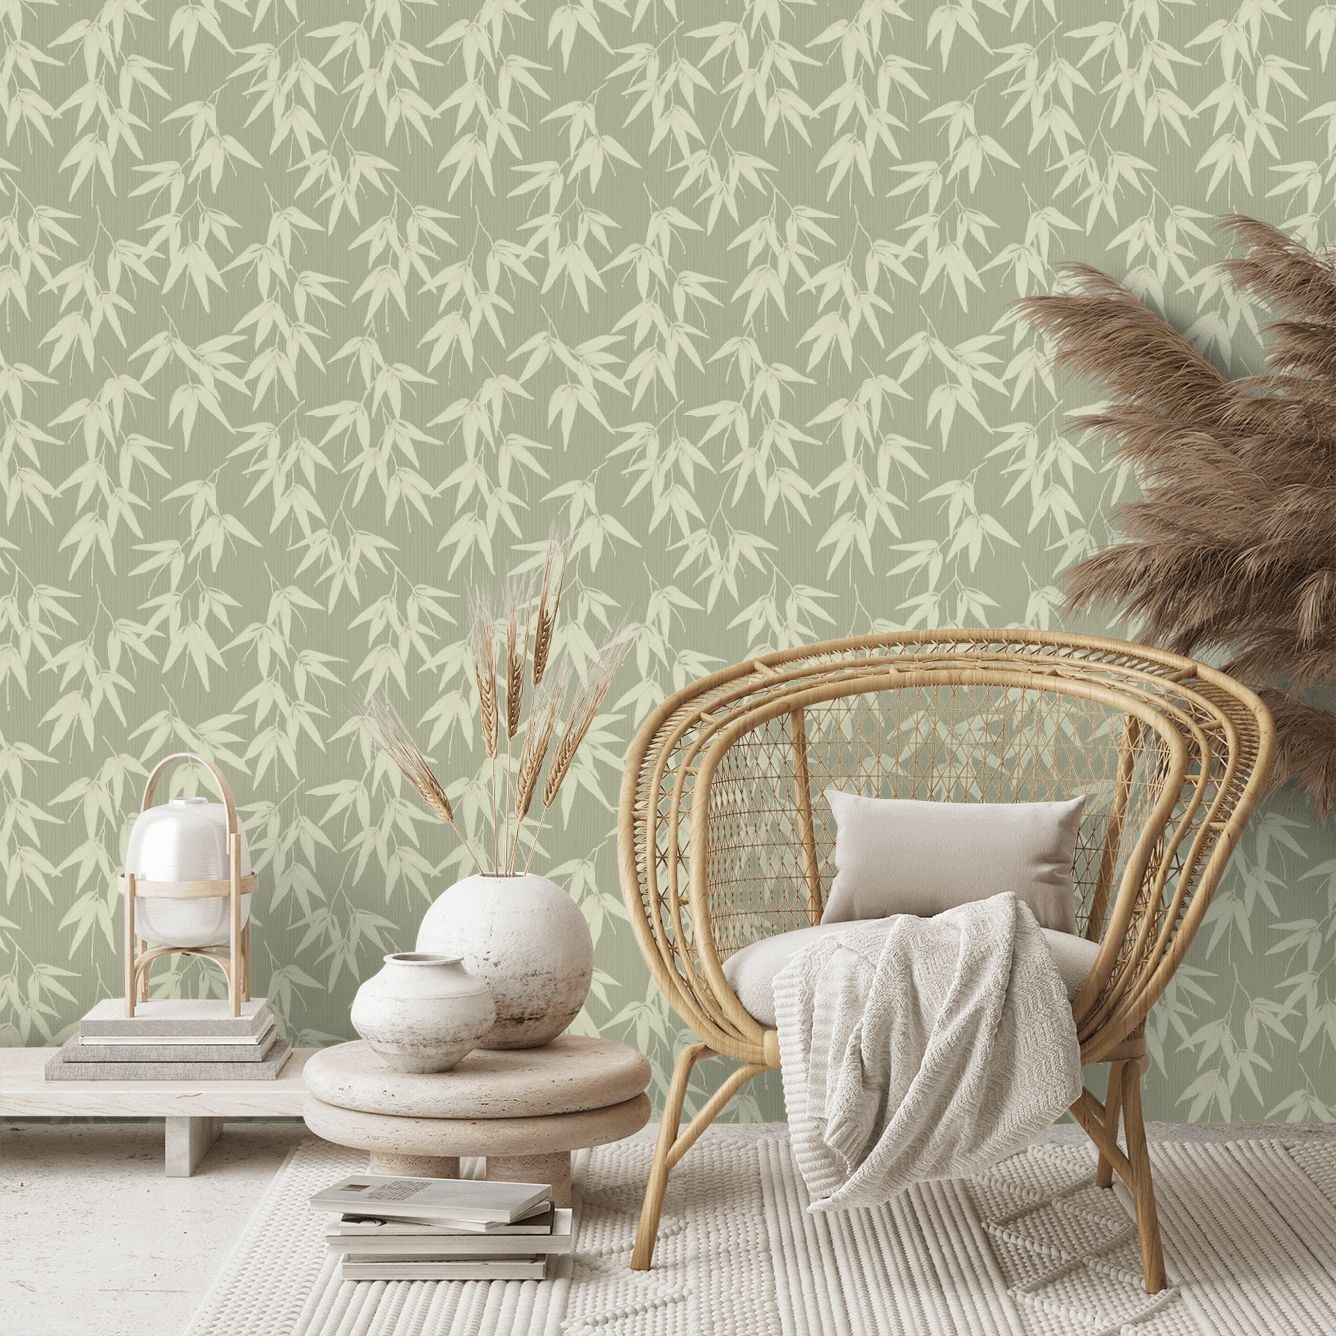 Bamboo Garden Wallpaper - Green - By Engblad and Co - 6467